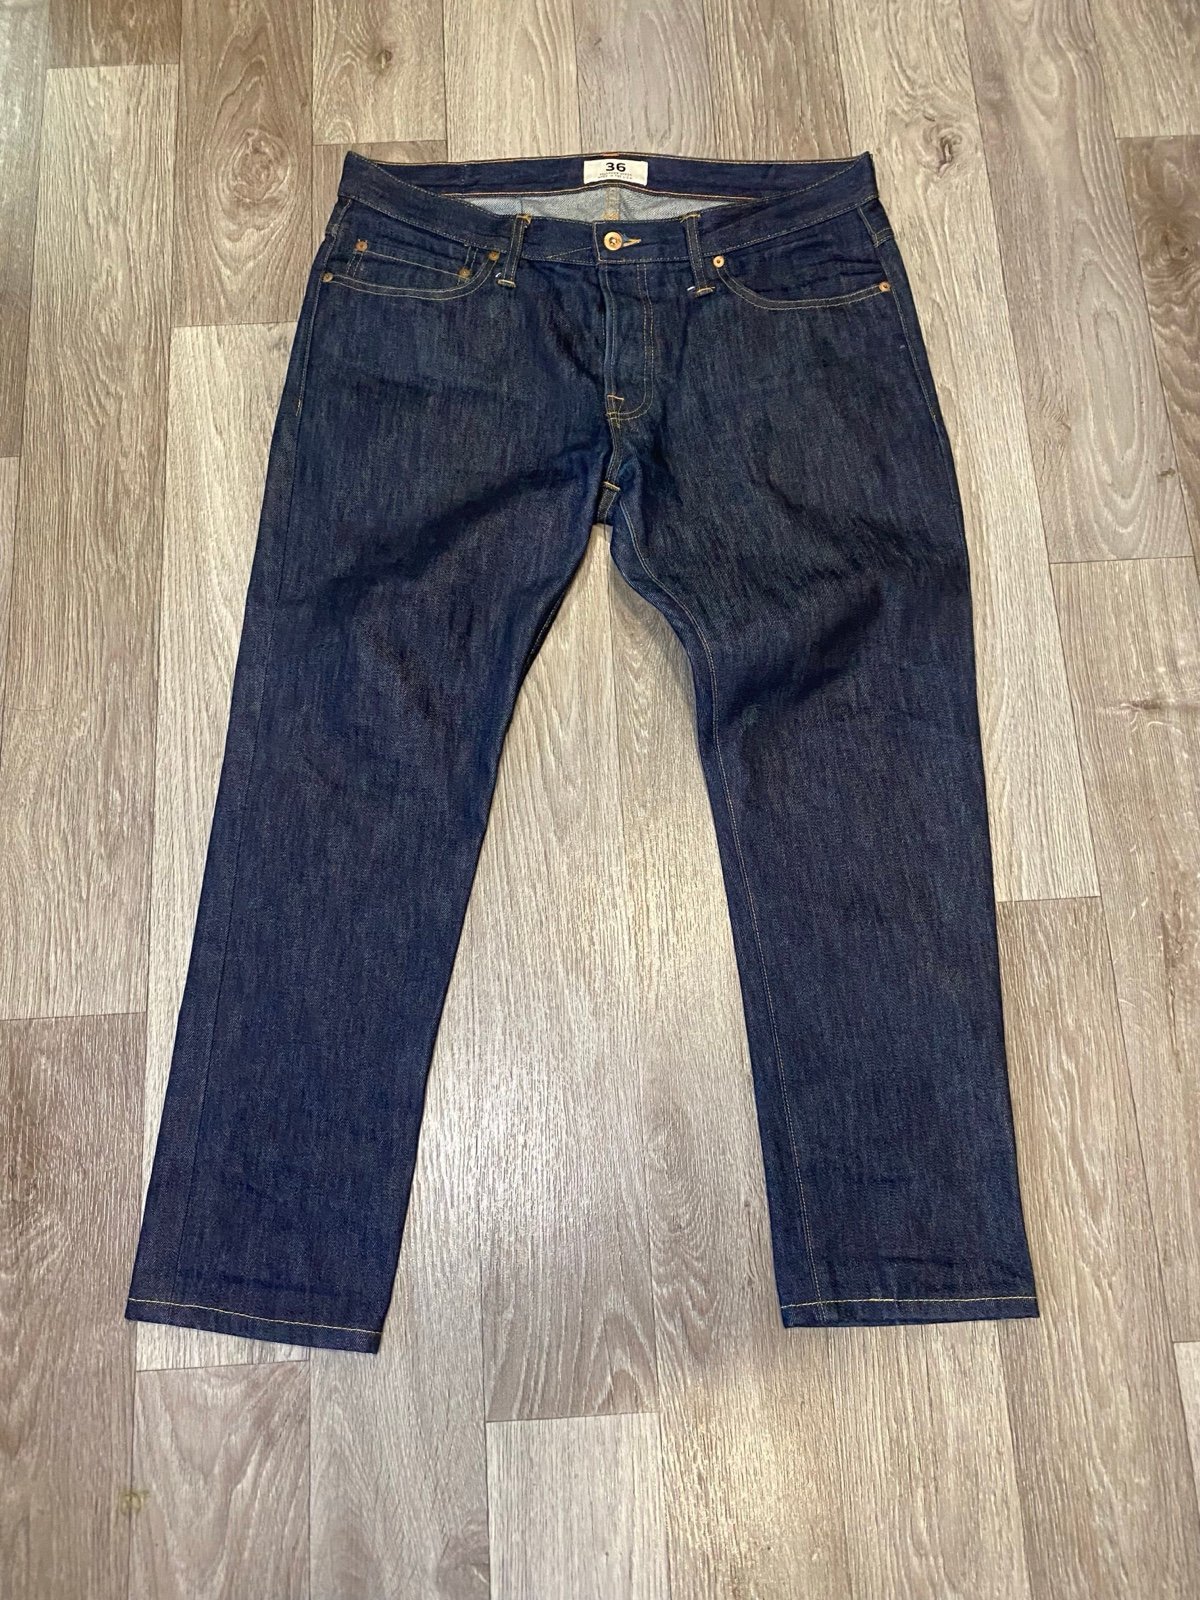 where to buy  Tellason Stock Jeans Mens 36 Blue Straigh